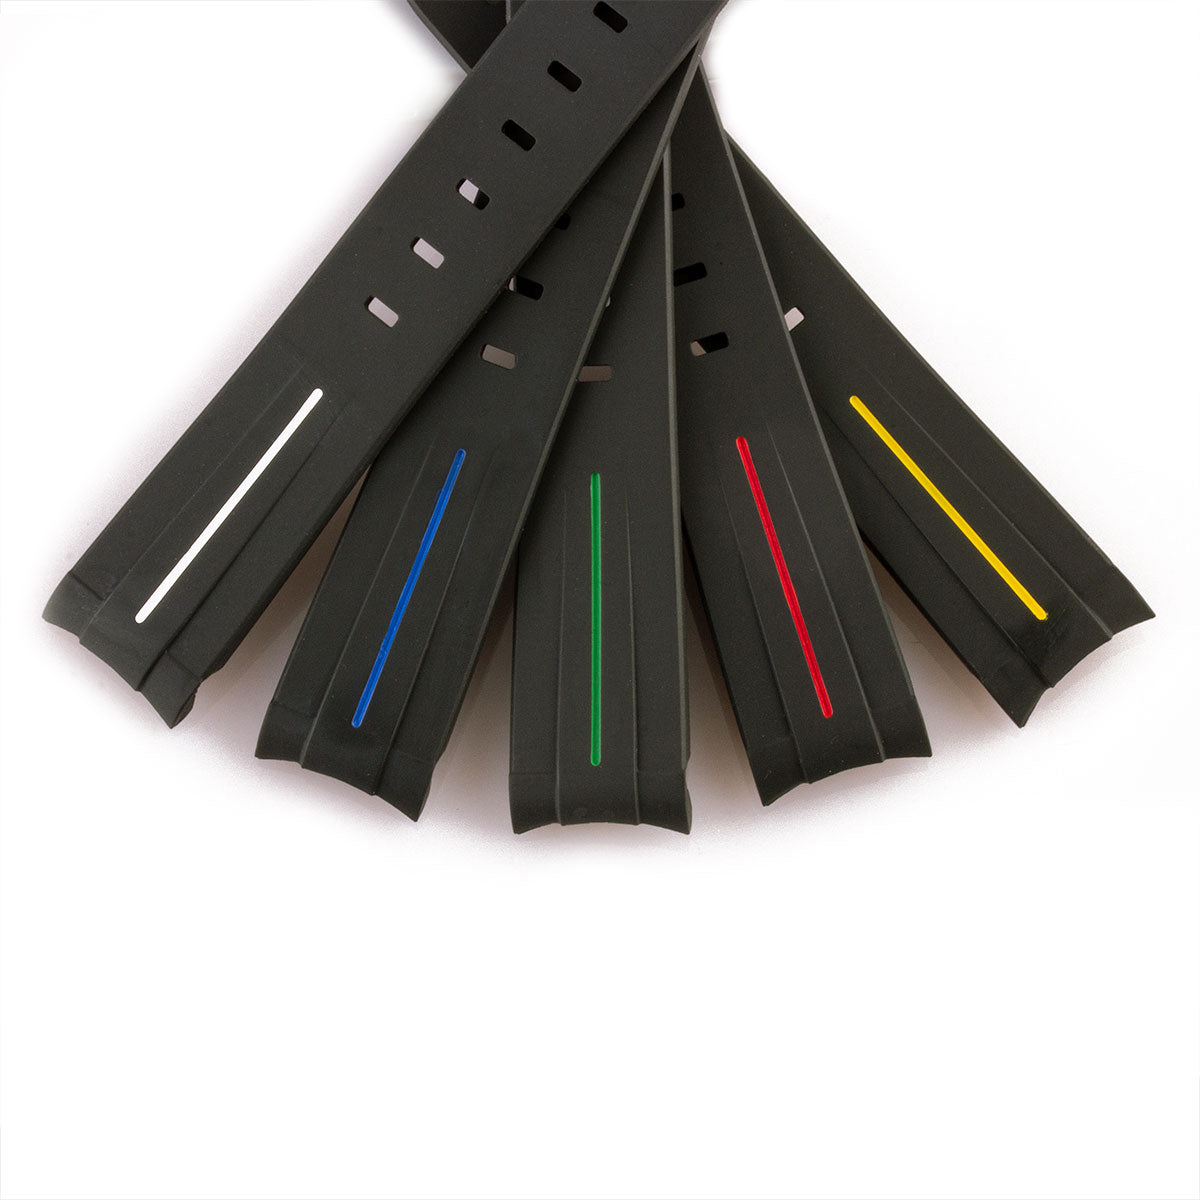 ​Rolex - FKM Rubber integrated watch band with tang buckle - Black rubber with stripe (blue, green, red...)